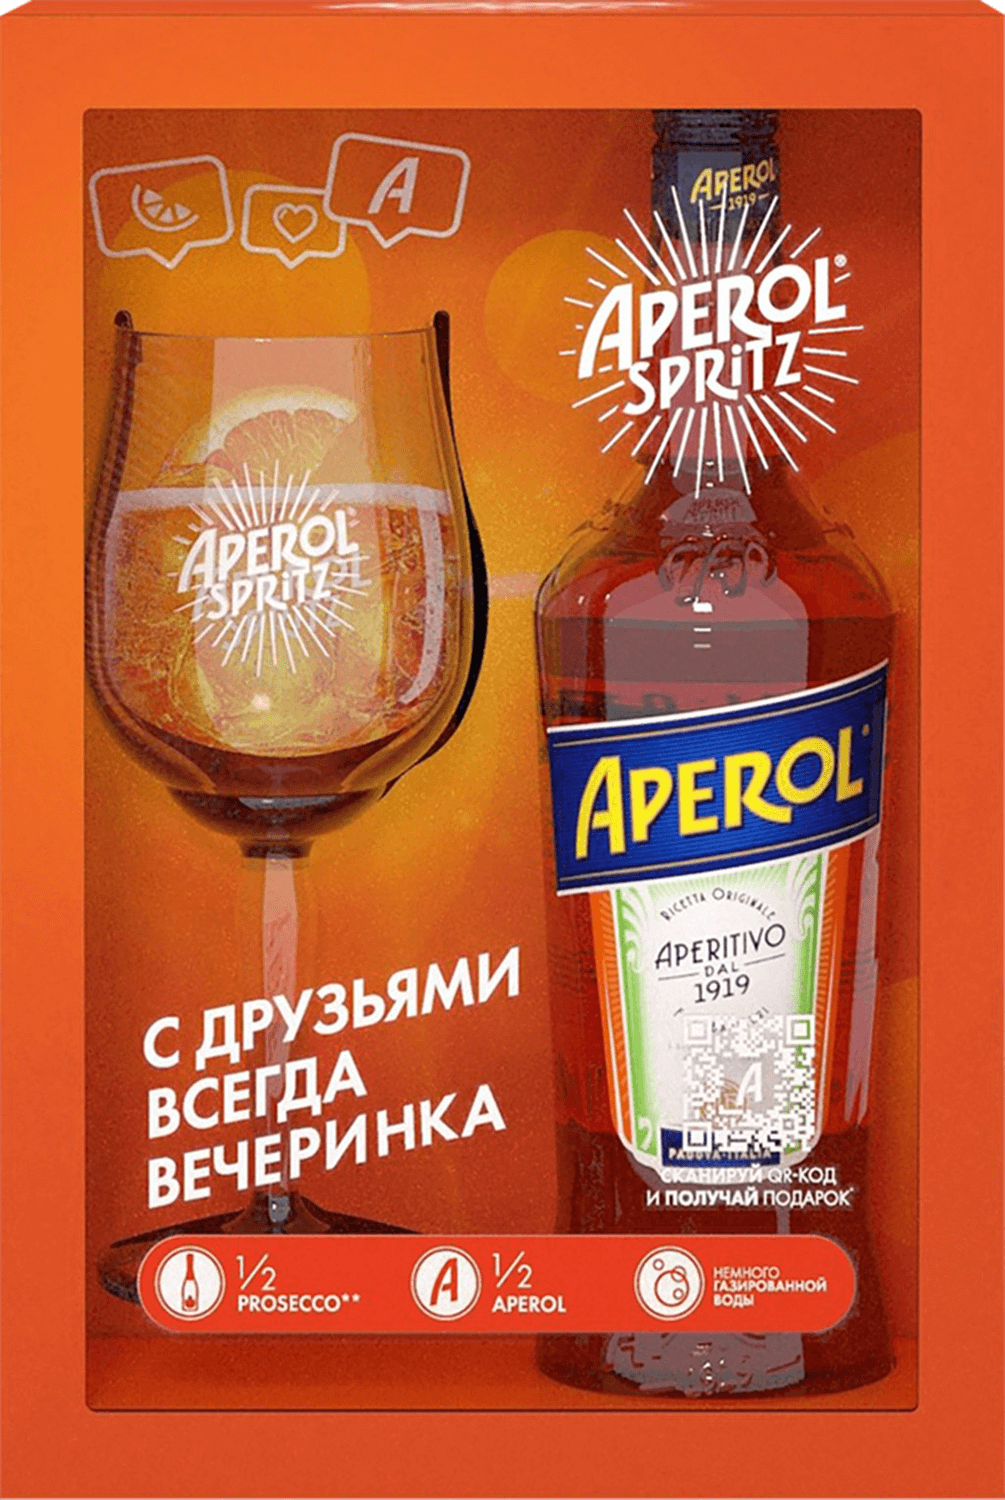 Aperol (gift box with a glass)